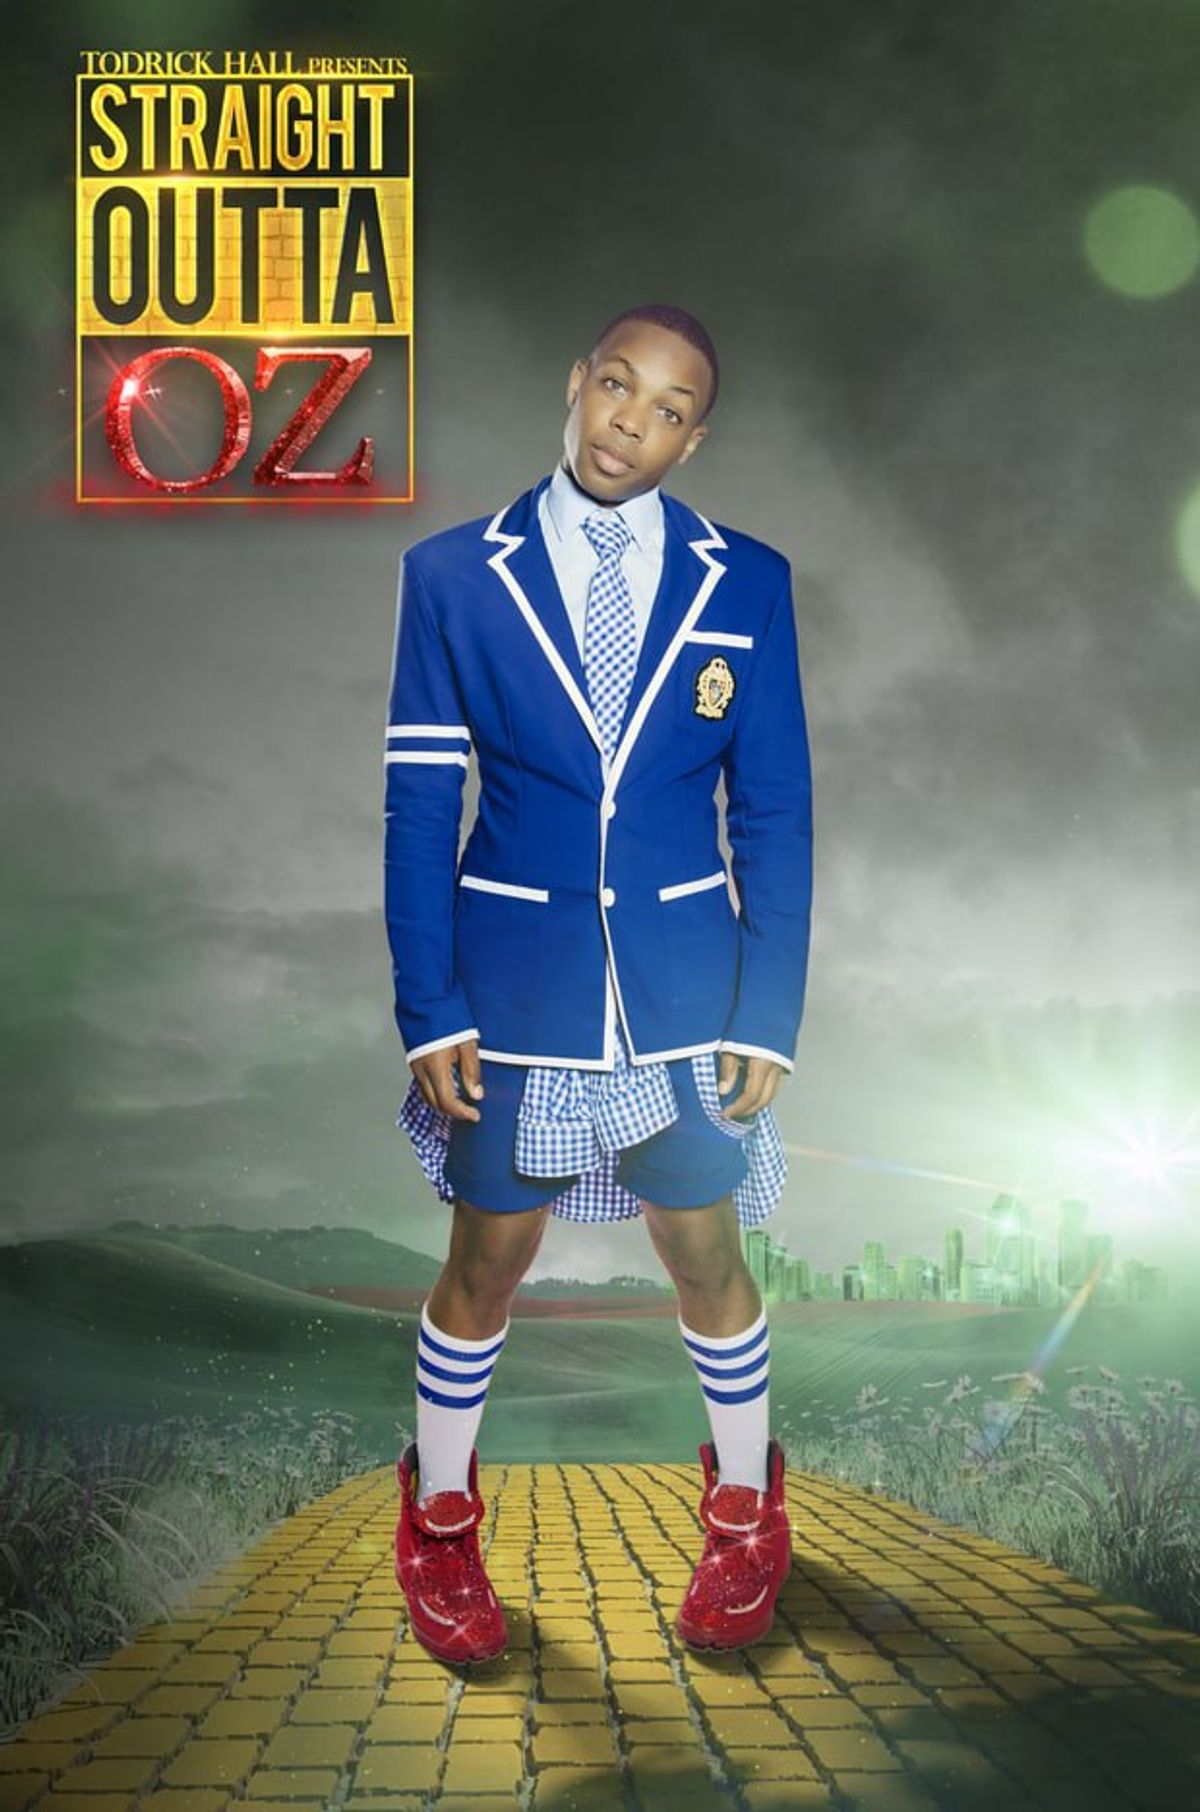 Why You Should Listen To Todrick's New Album 'Straight Outta Oz'